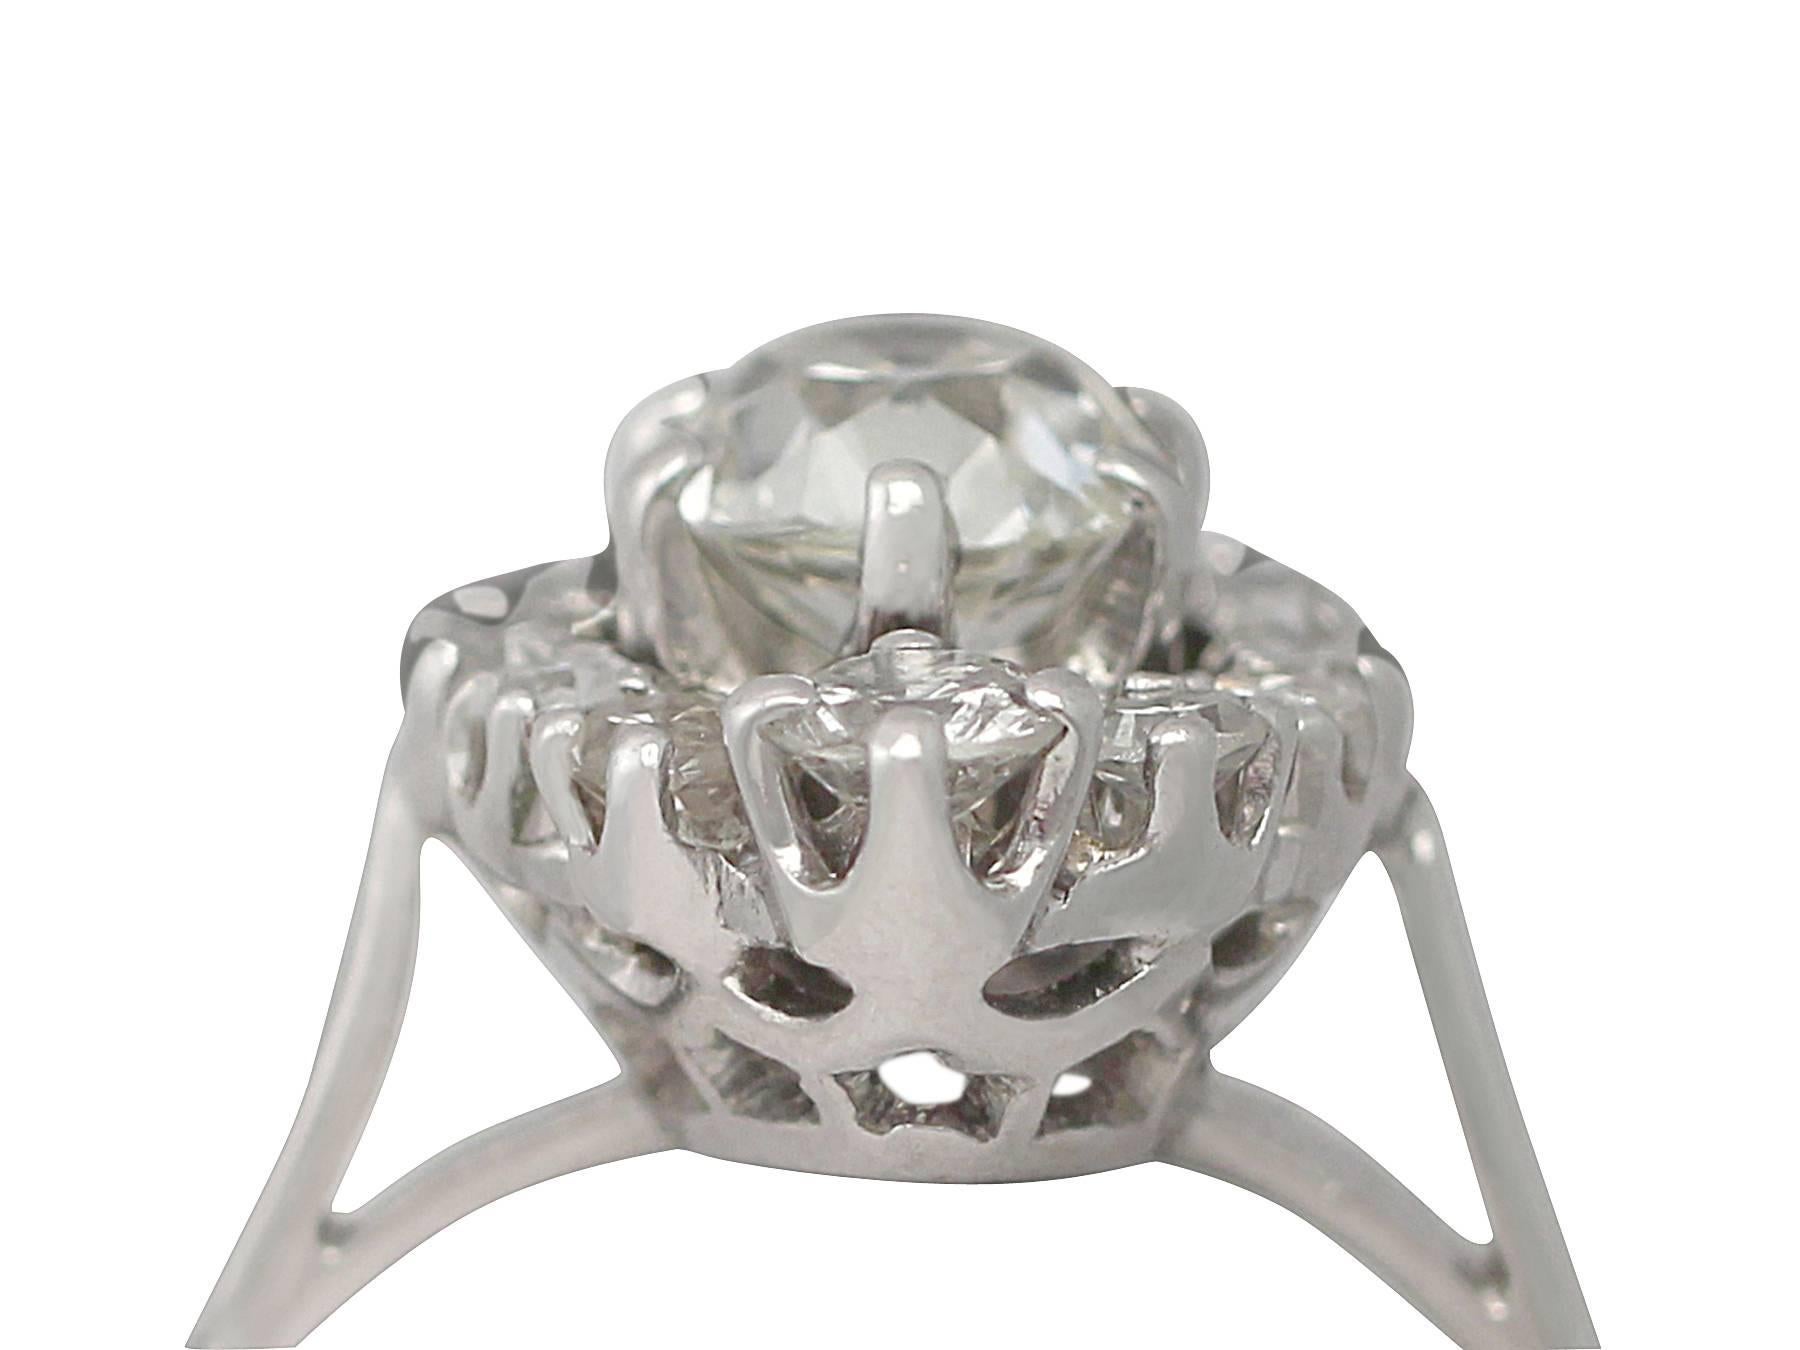 A fine and impressive antique 1.49 carat diamond and 18k white gold, platinum set cocktail ring; part of our collection of antique diamond rings

This fine and impressive antique diamond dress ring has been crafted in 18k white gold with a